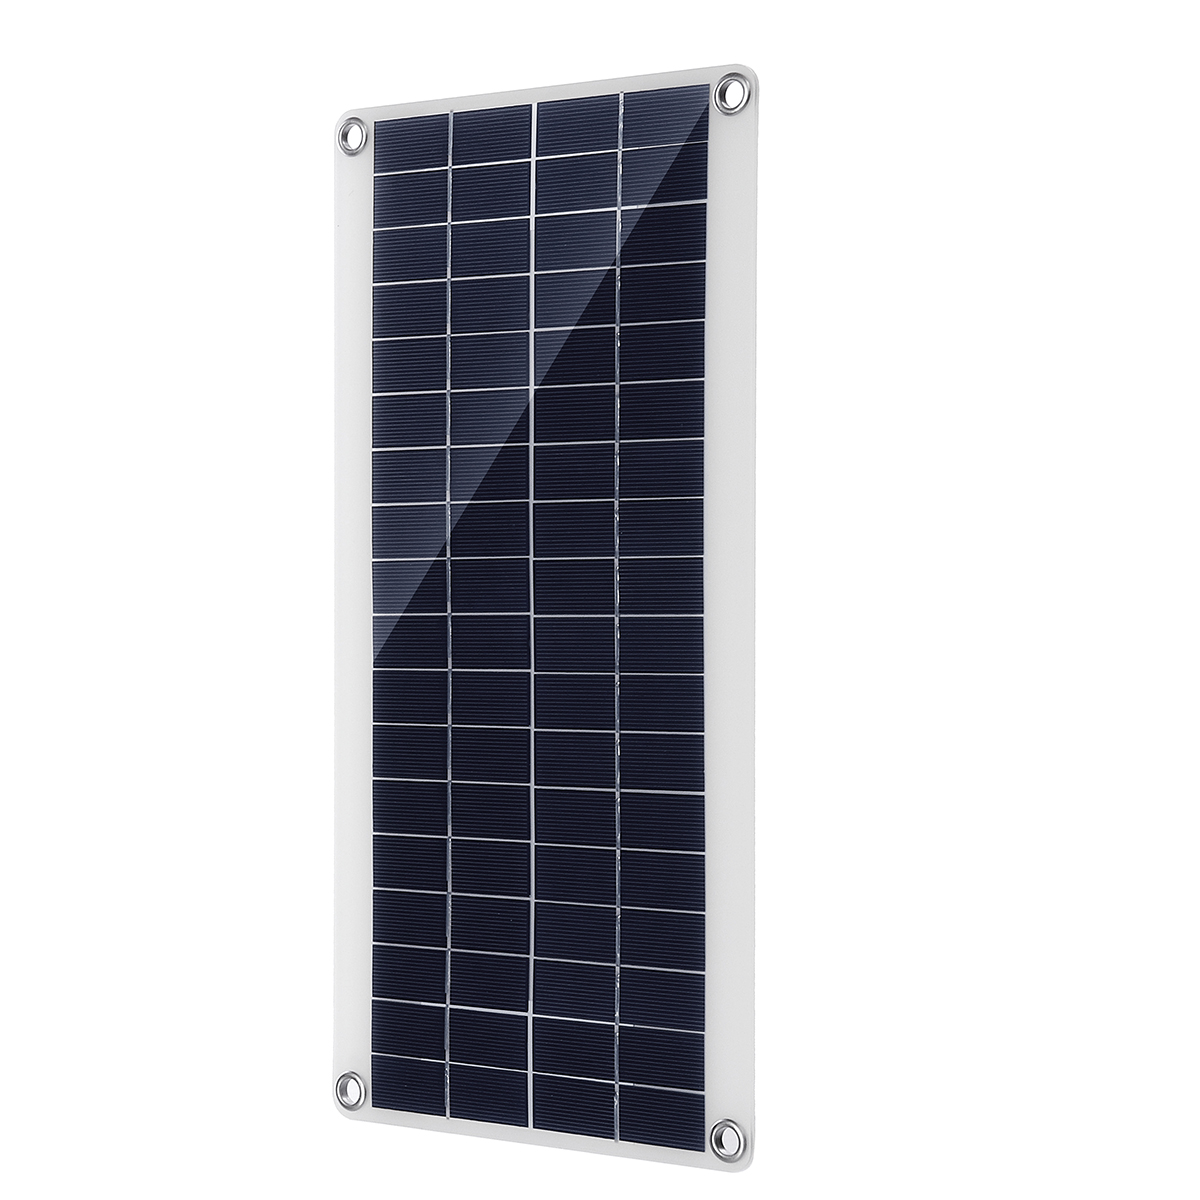 20W-Portable-Solar-Panel-Kit-DC-USB-Charging-Double-USB-Port-Suction-Cups-Camping-Traveling-1383681-4